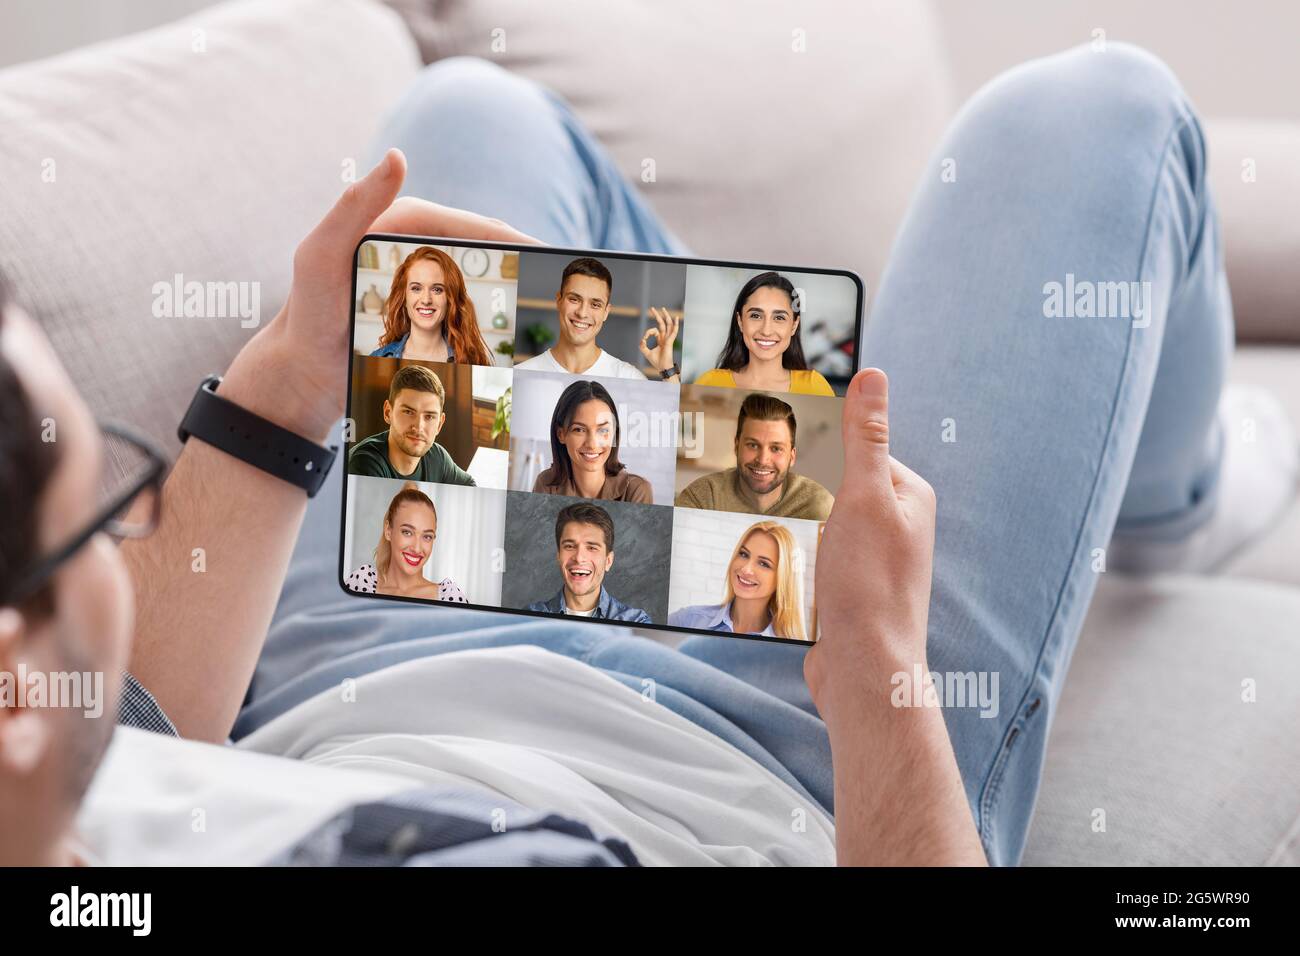 Man Having Group Video Chat With Friends While Relaxing With Digital Tablet  Stock Photo - Alamy